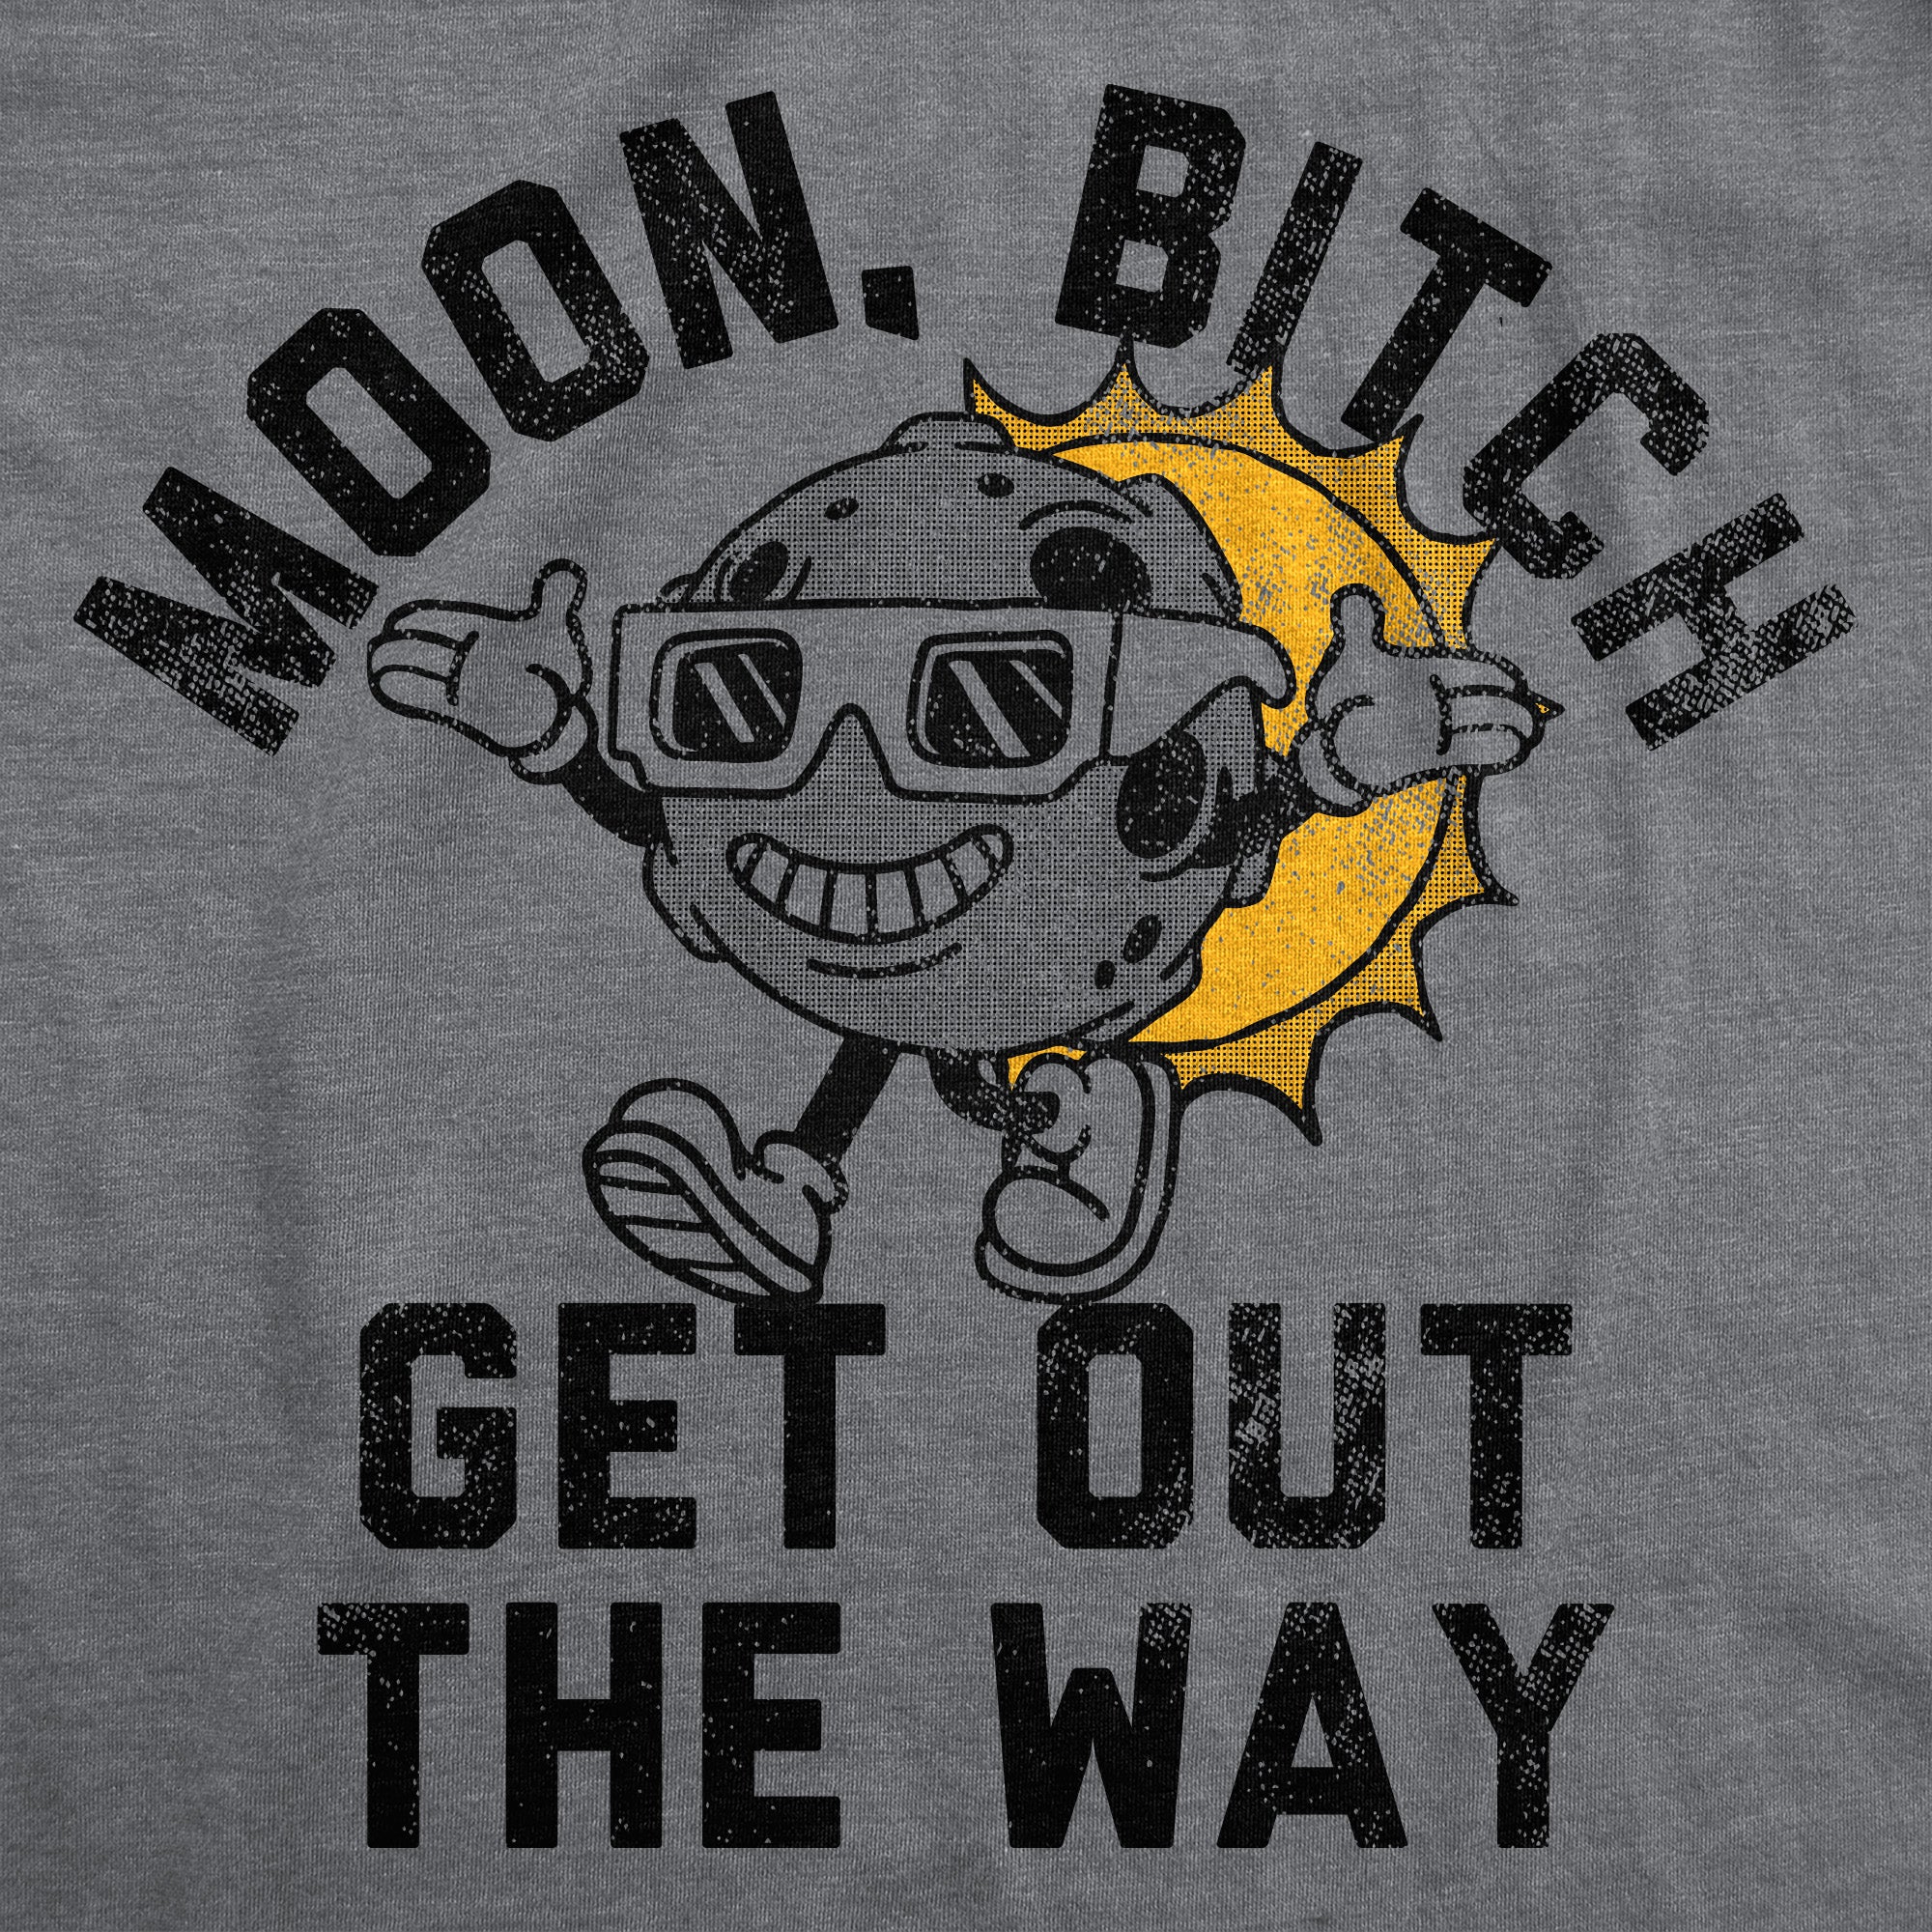 Funny Dark Heather Grey - Moon Bitch Get Out The Way Moon Bitch Get Out The Way Mens T Shirt Nerdy space sarcastic Tee